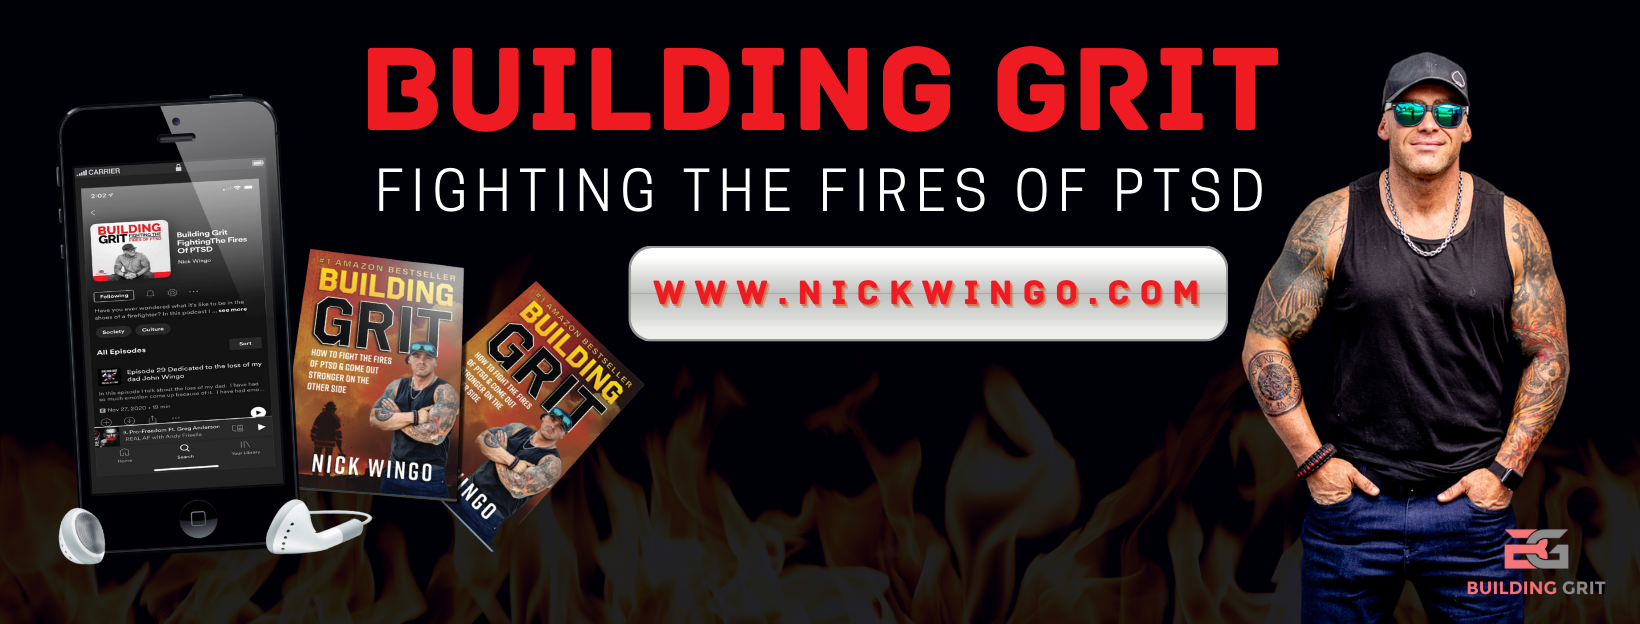 Becoming the Big Me: The Great Conquest | Nick Wingo | Building Grit